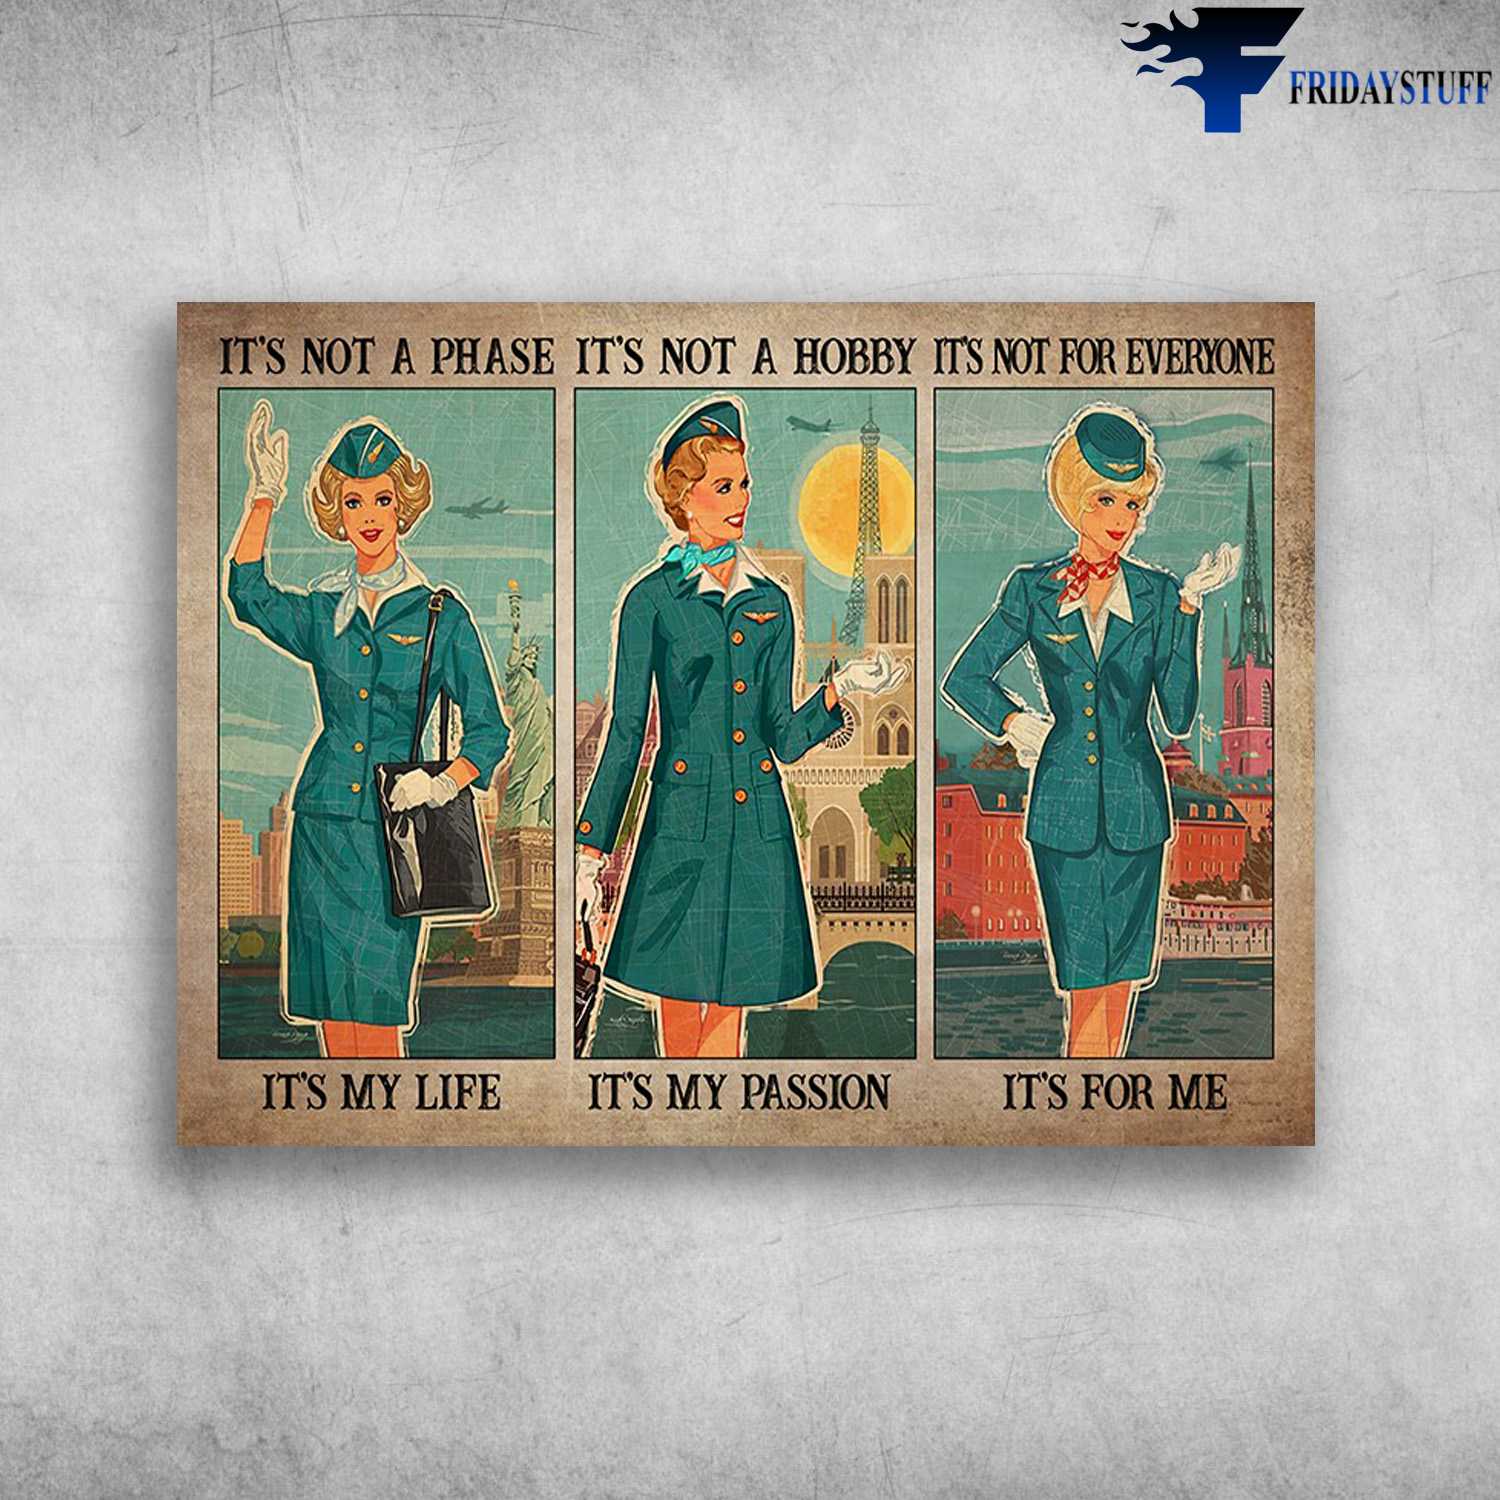 Flight Attendant - It's Not A Phase, It's My Life, It's Not A Hobby, It's My Passion, It's Not For Everyone, It's For Me